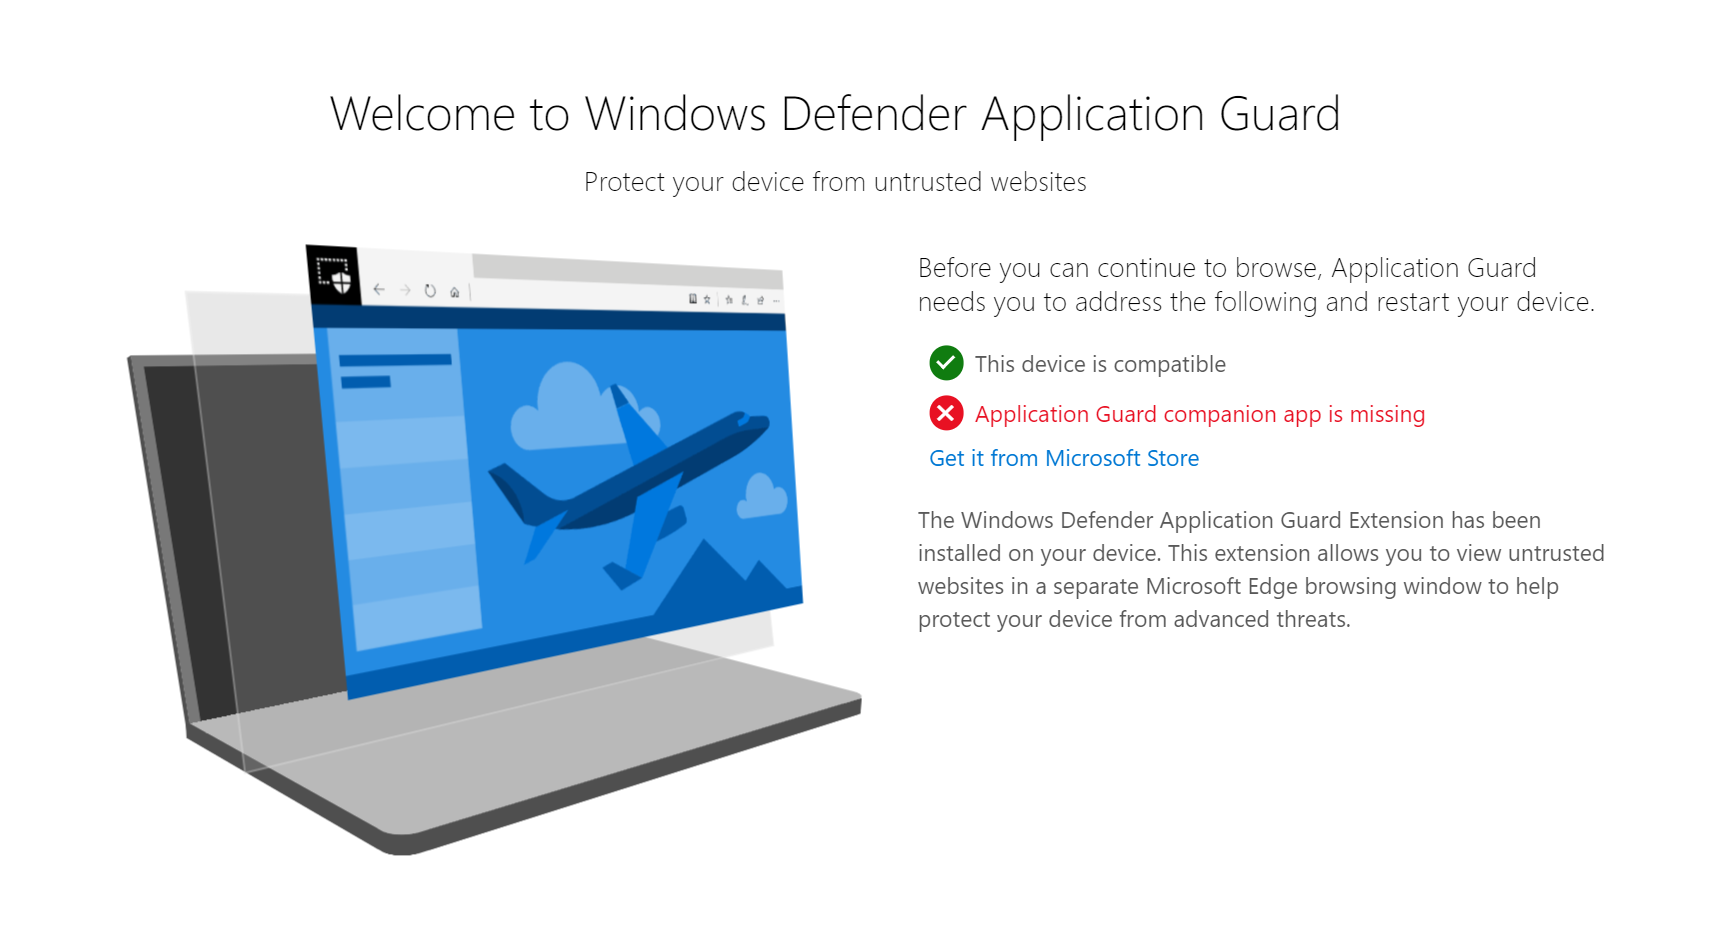 Turn On or Off Save Data in Application Guard for Microsoft Edge windows-defender-application-guard-components-not-complete.png